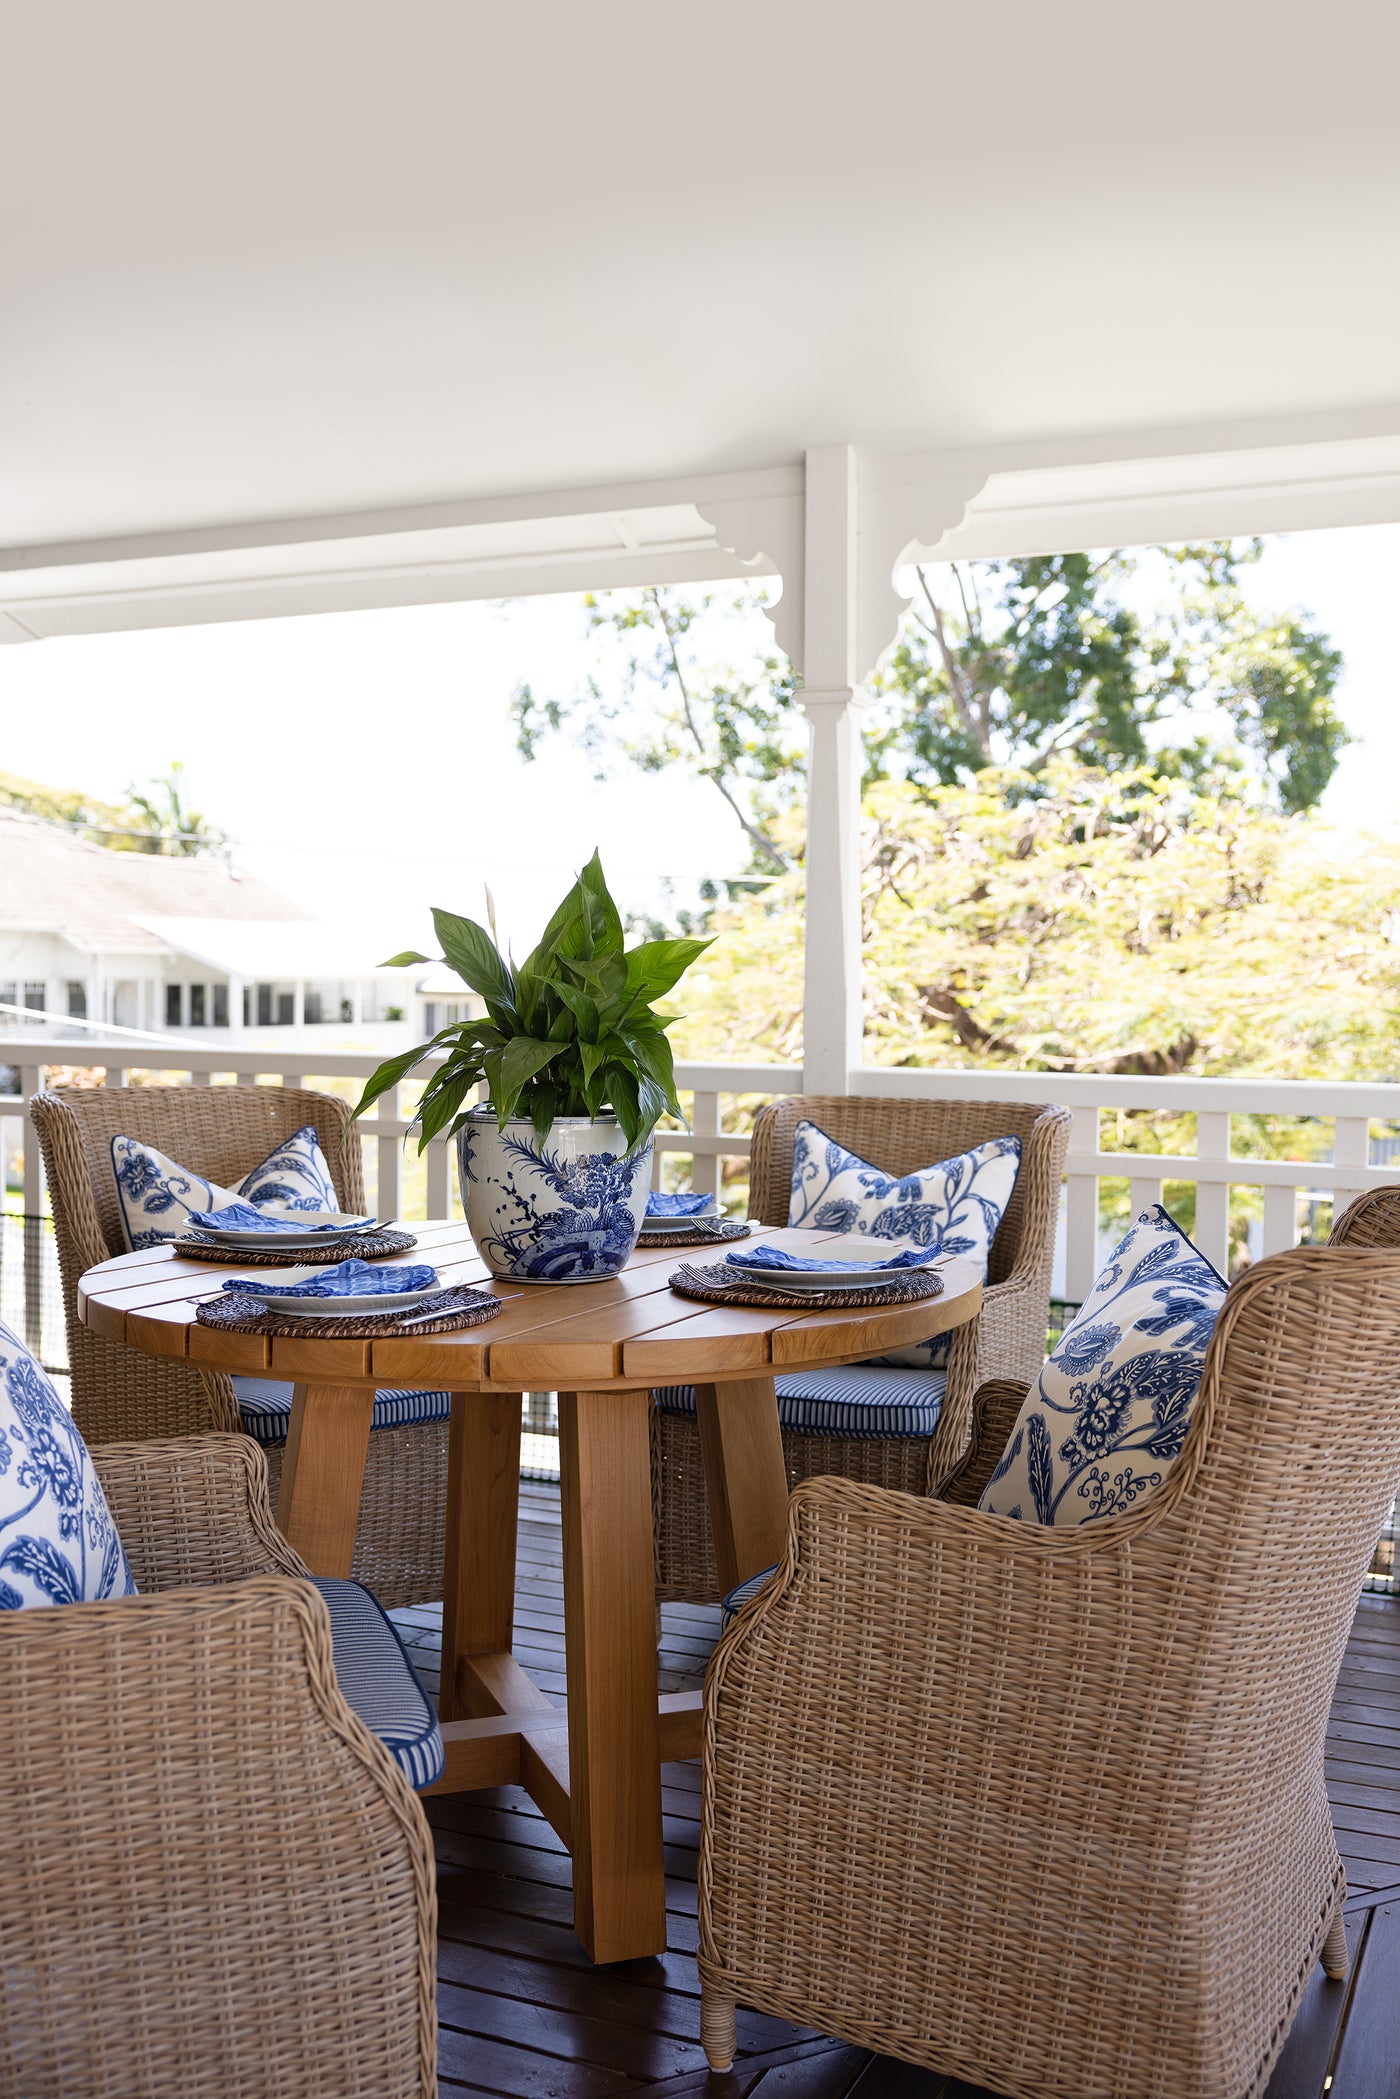 Image of Airlee Outdoor Dining Chair in a table setting with blue cushions